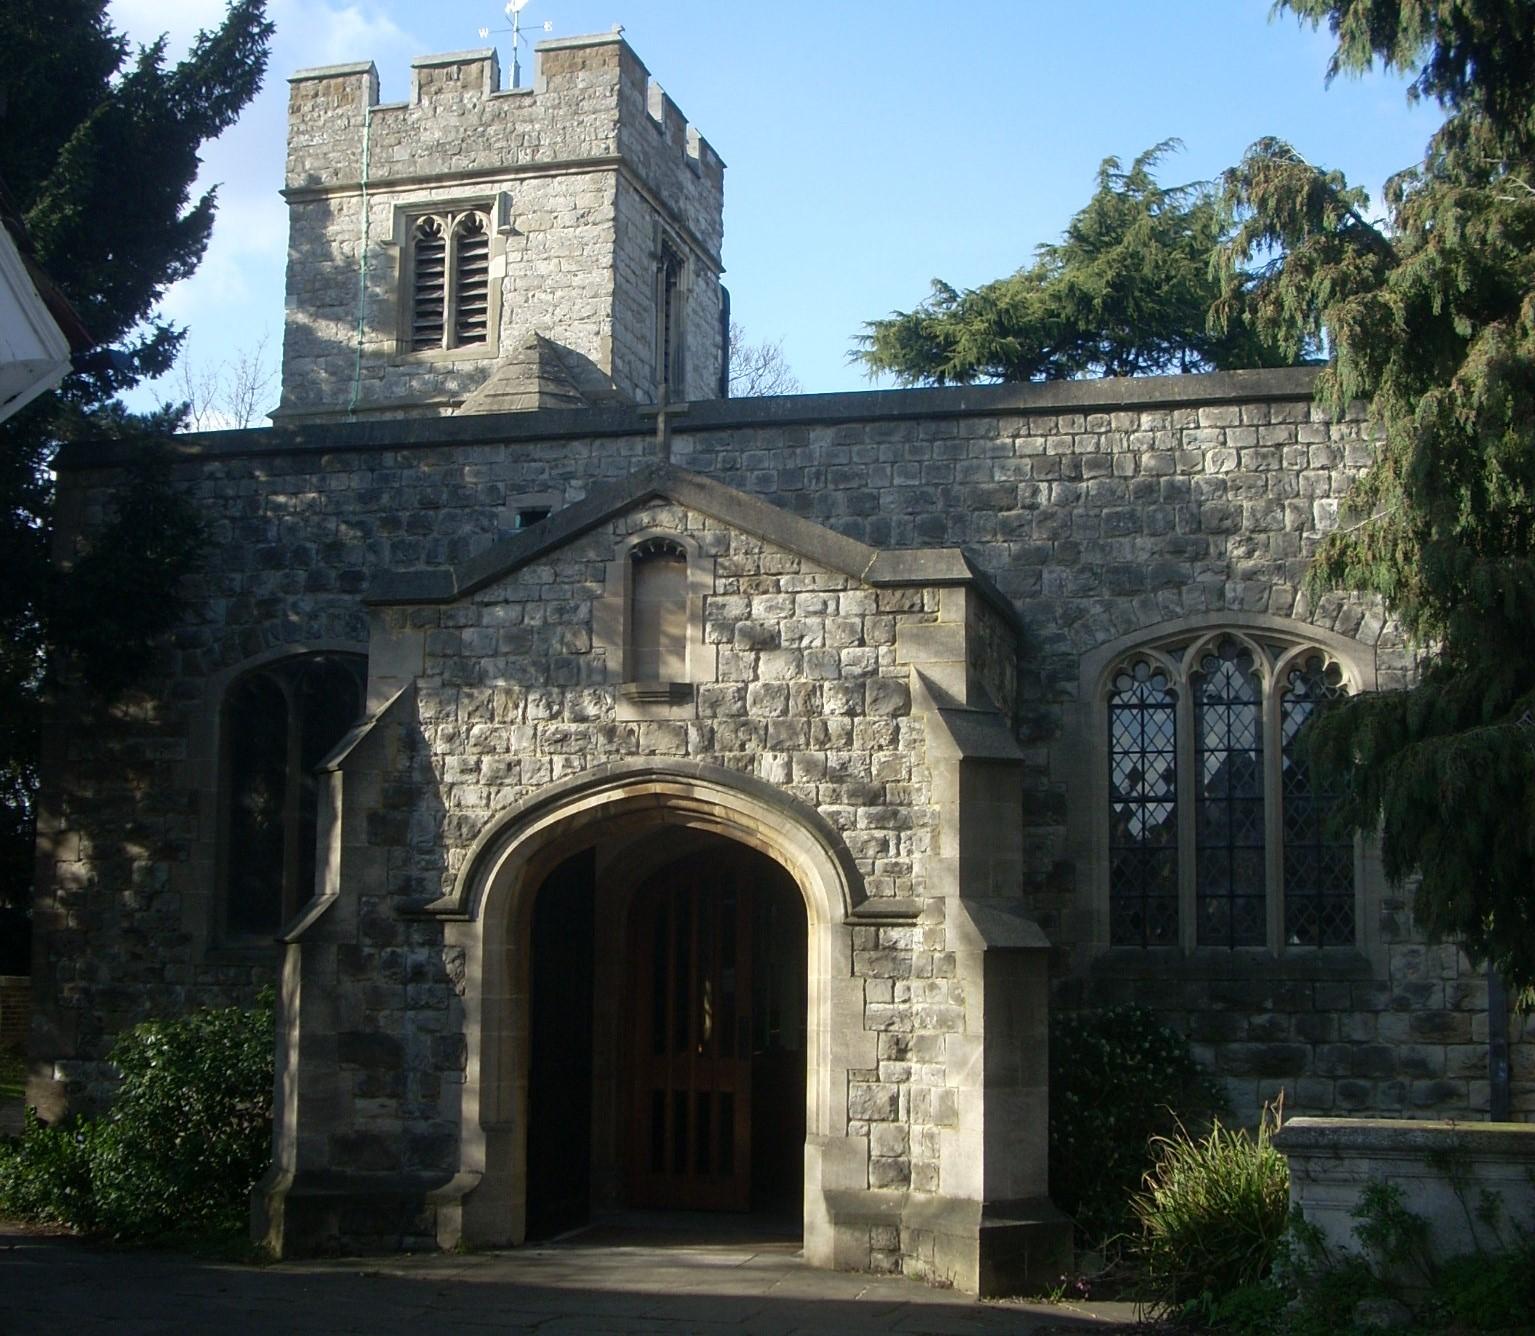 St Mary at Finchley chuch